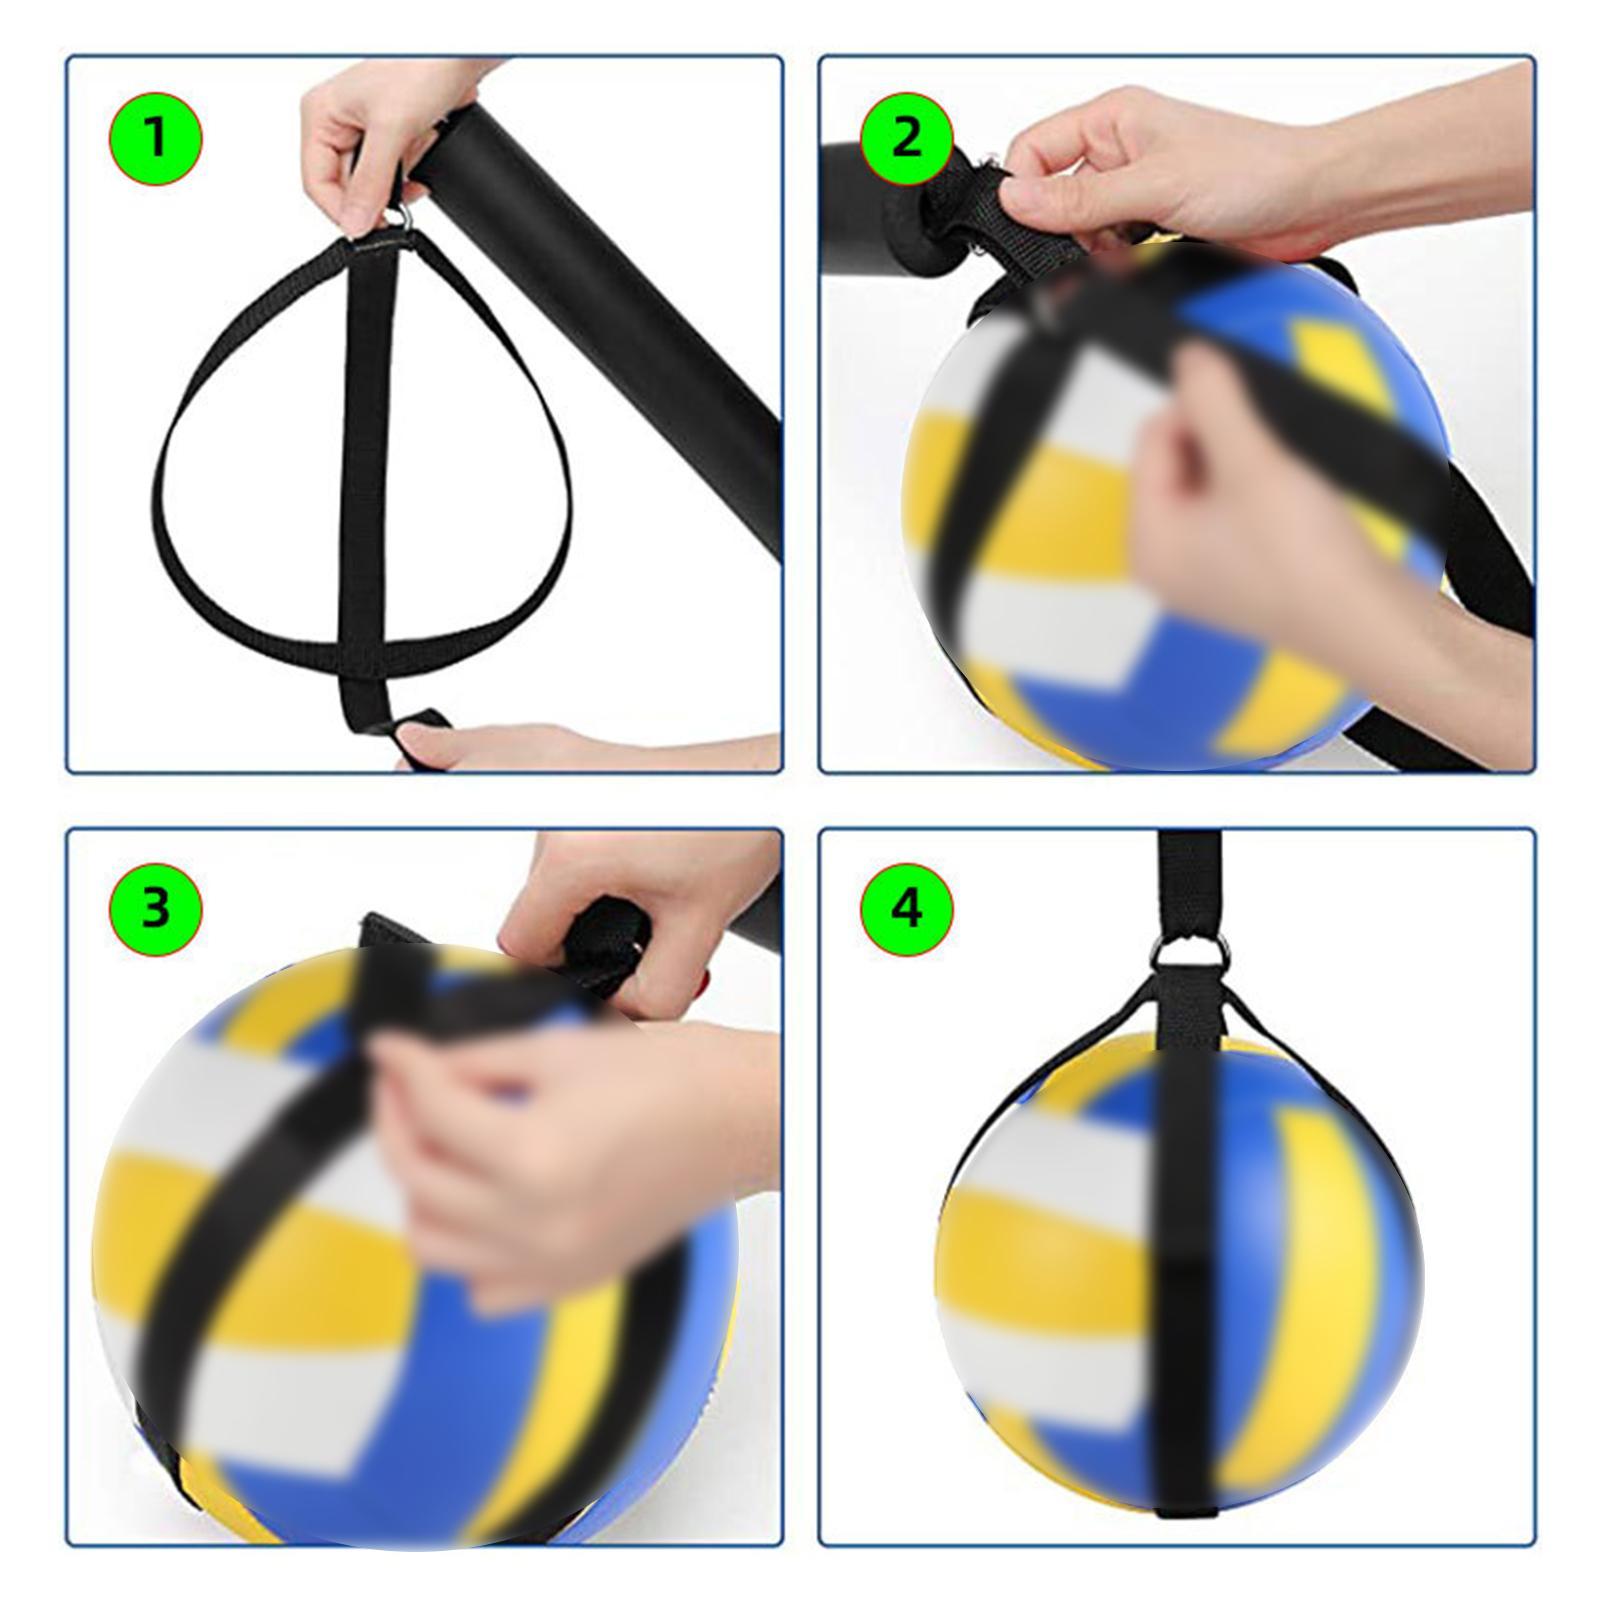 Volleyball Training System, Improve Practicing Jumping